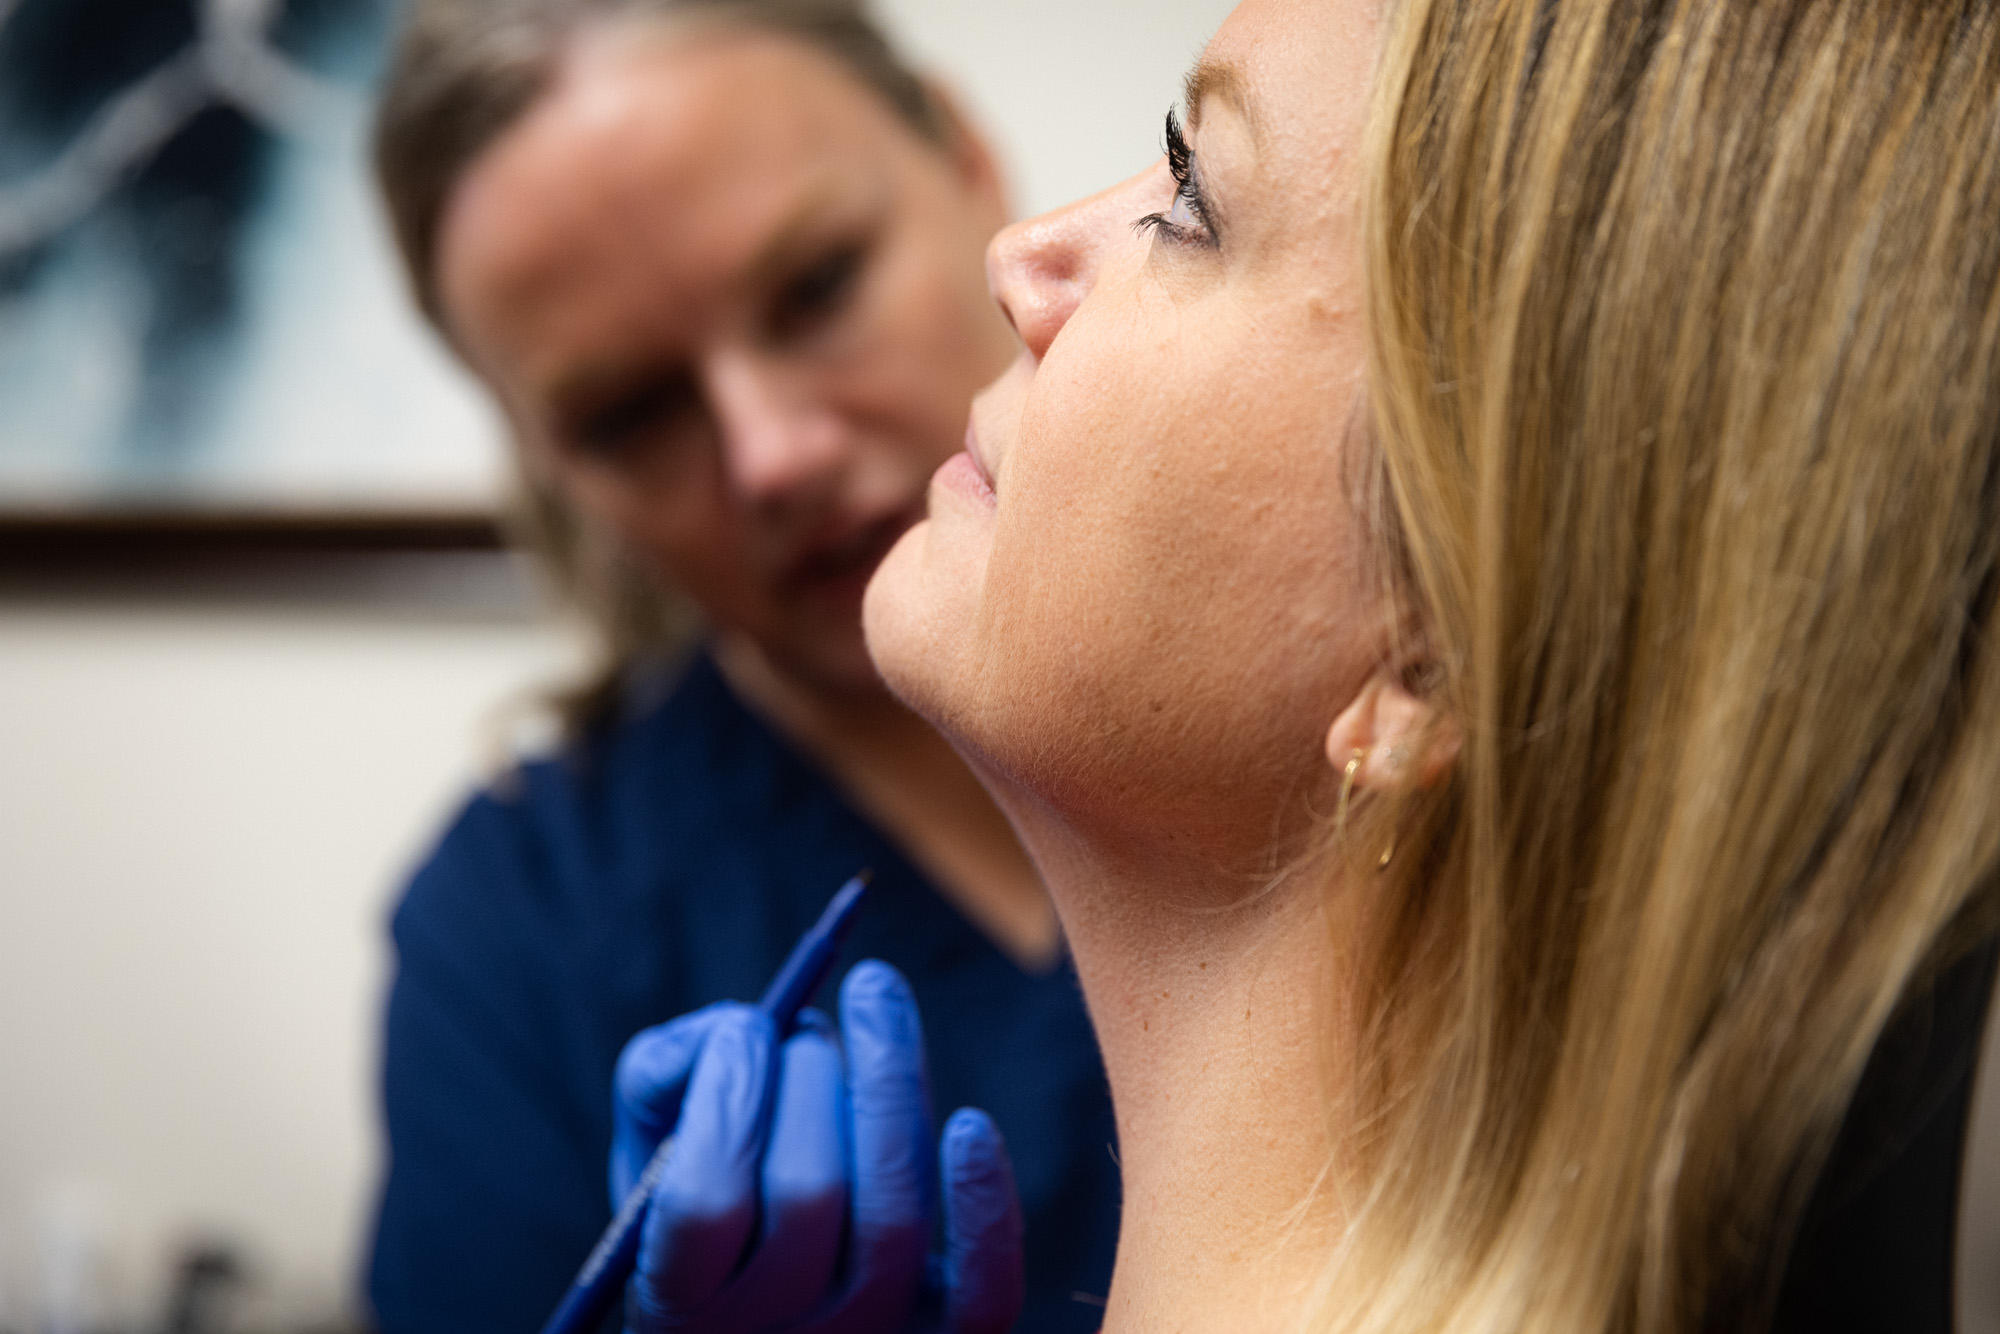 A patient looks up as an Envision specialist plans her Kybella injection.